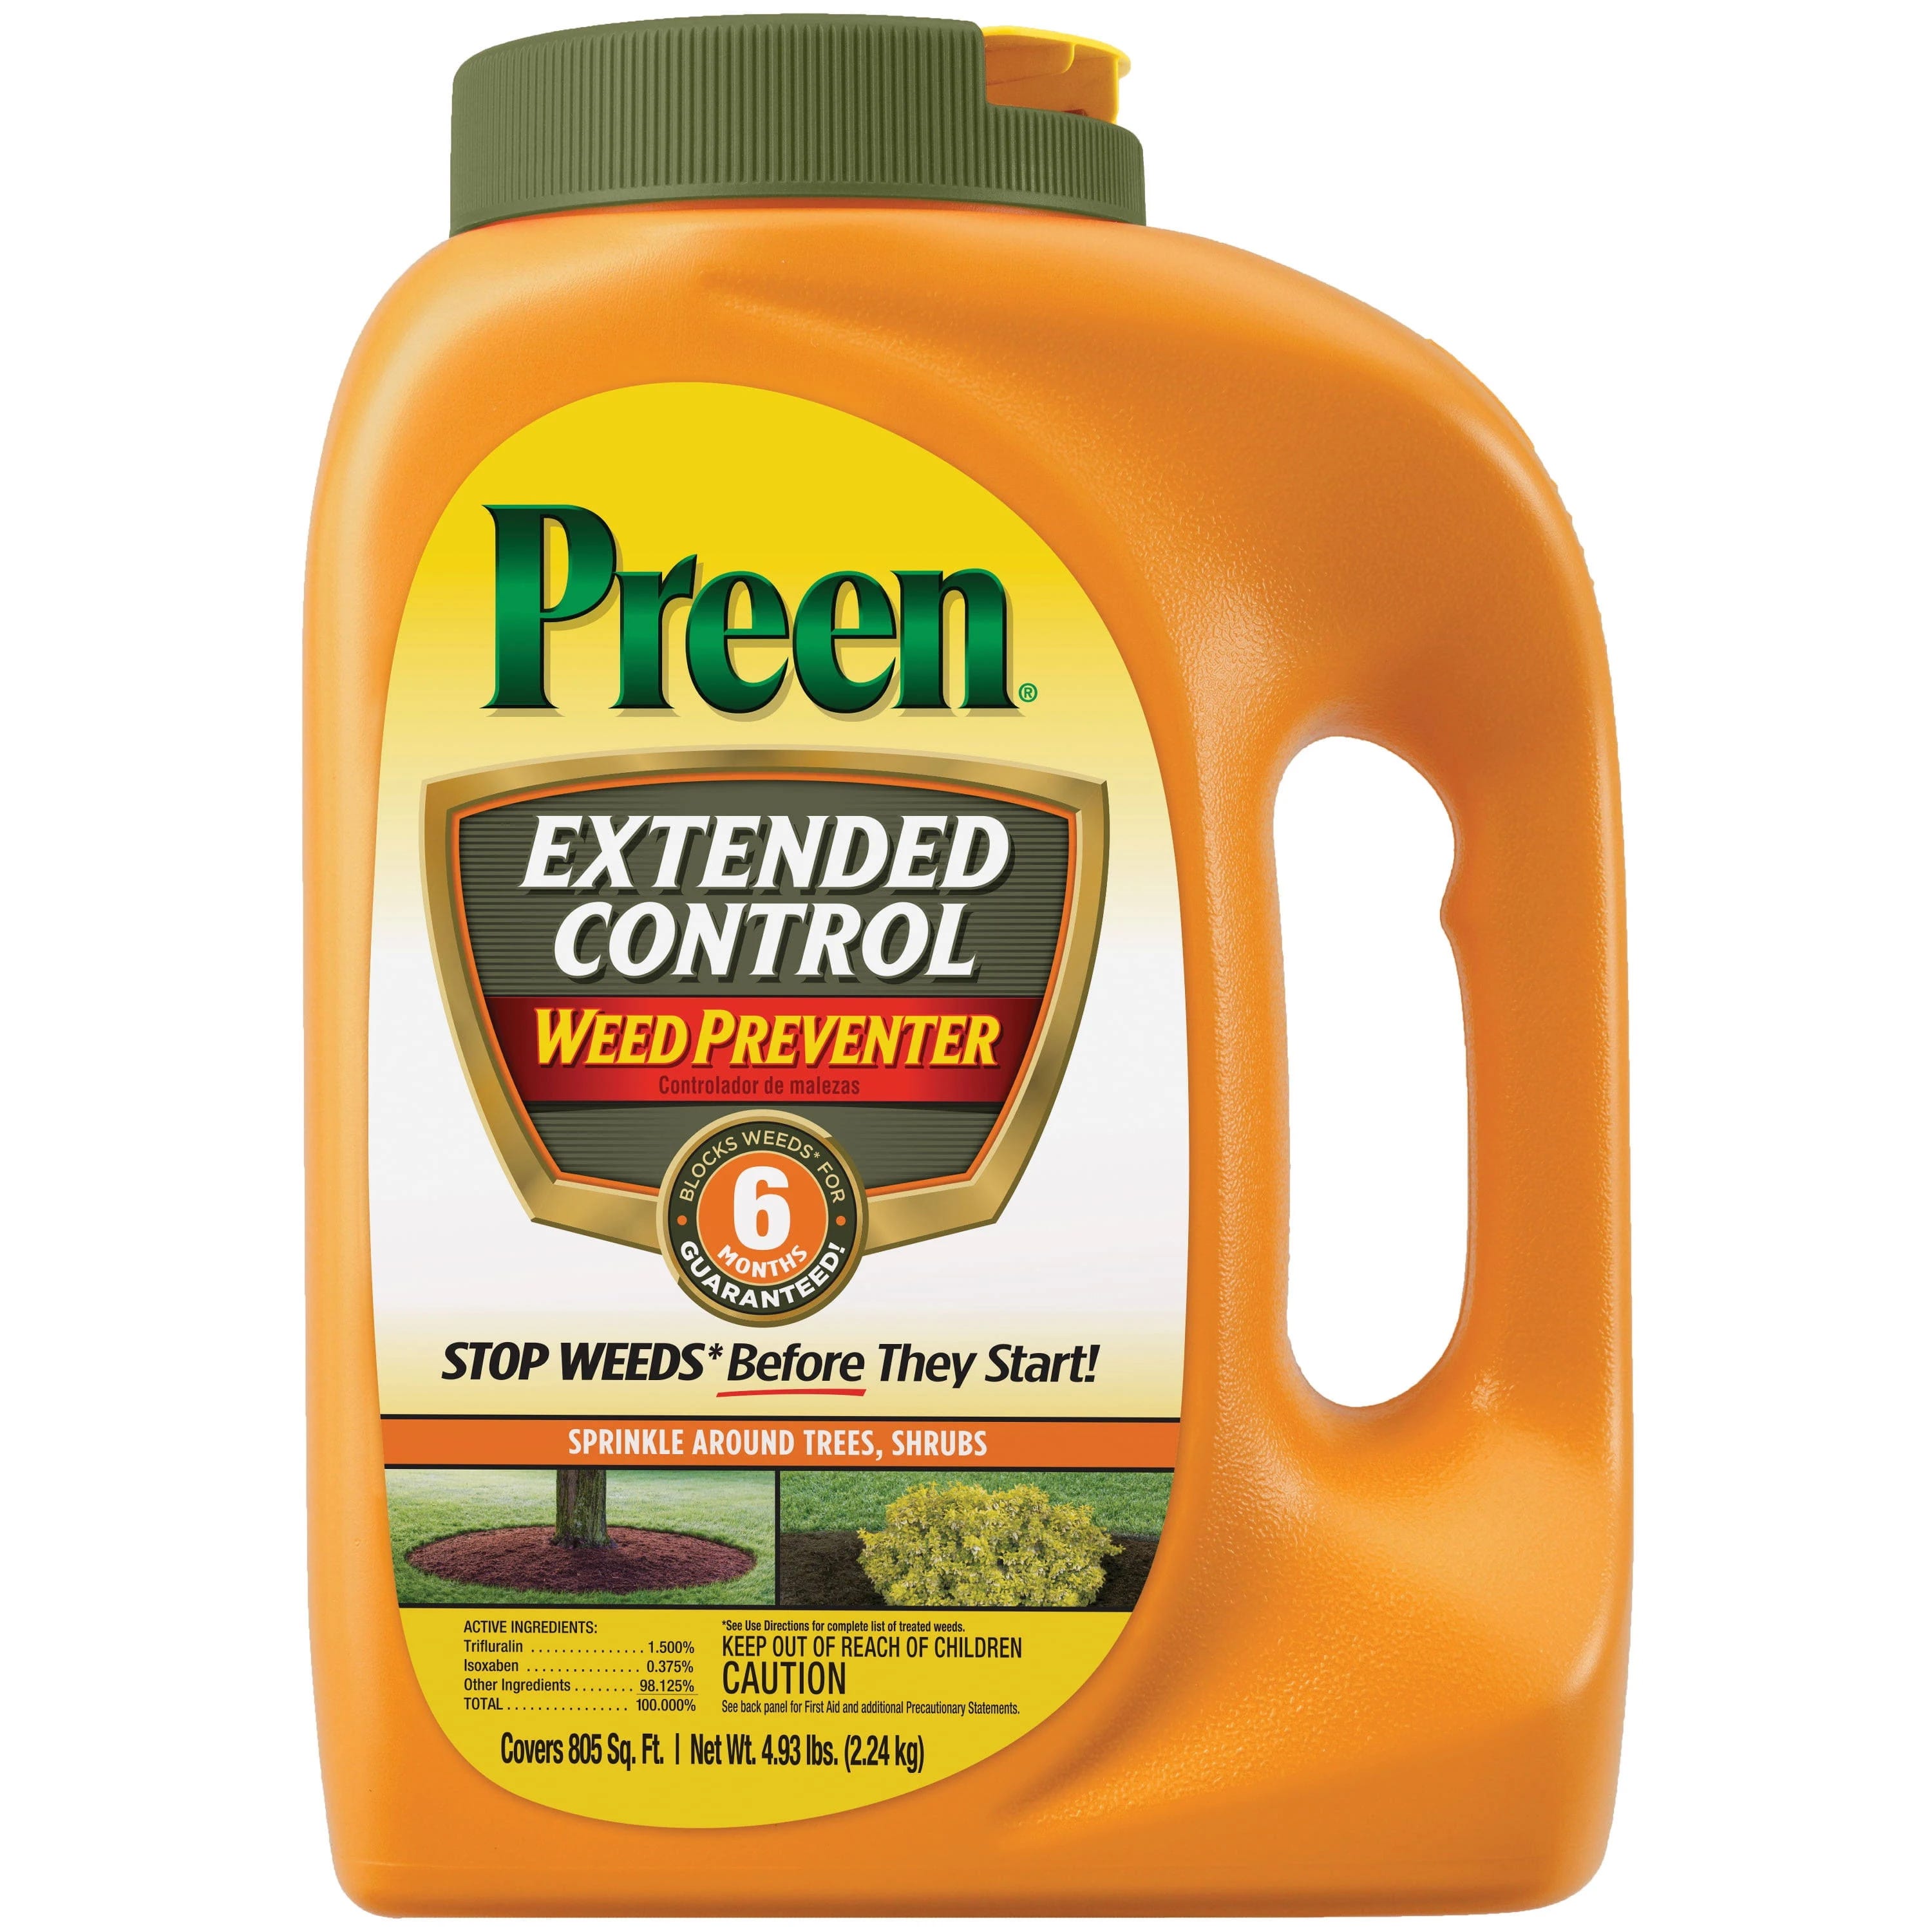 Preen Extended Control Weed Preventer (Pet Safe) - 4.93 lbs. | Image